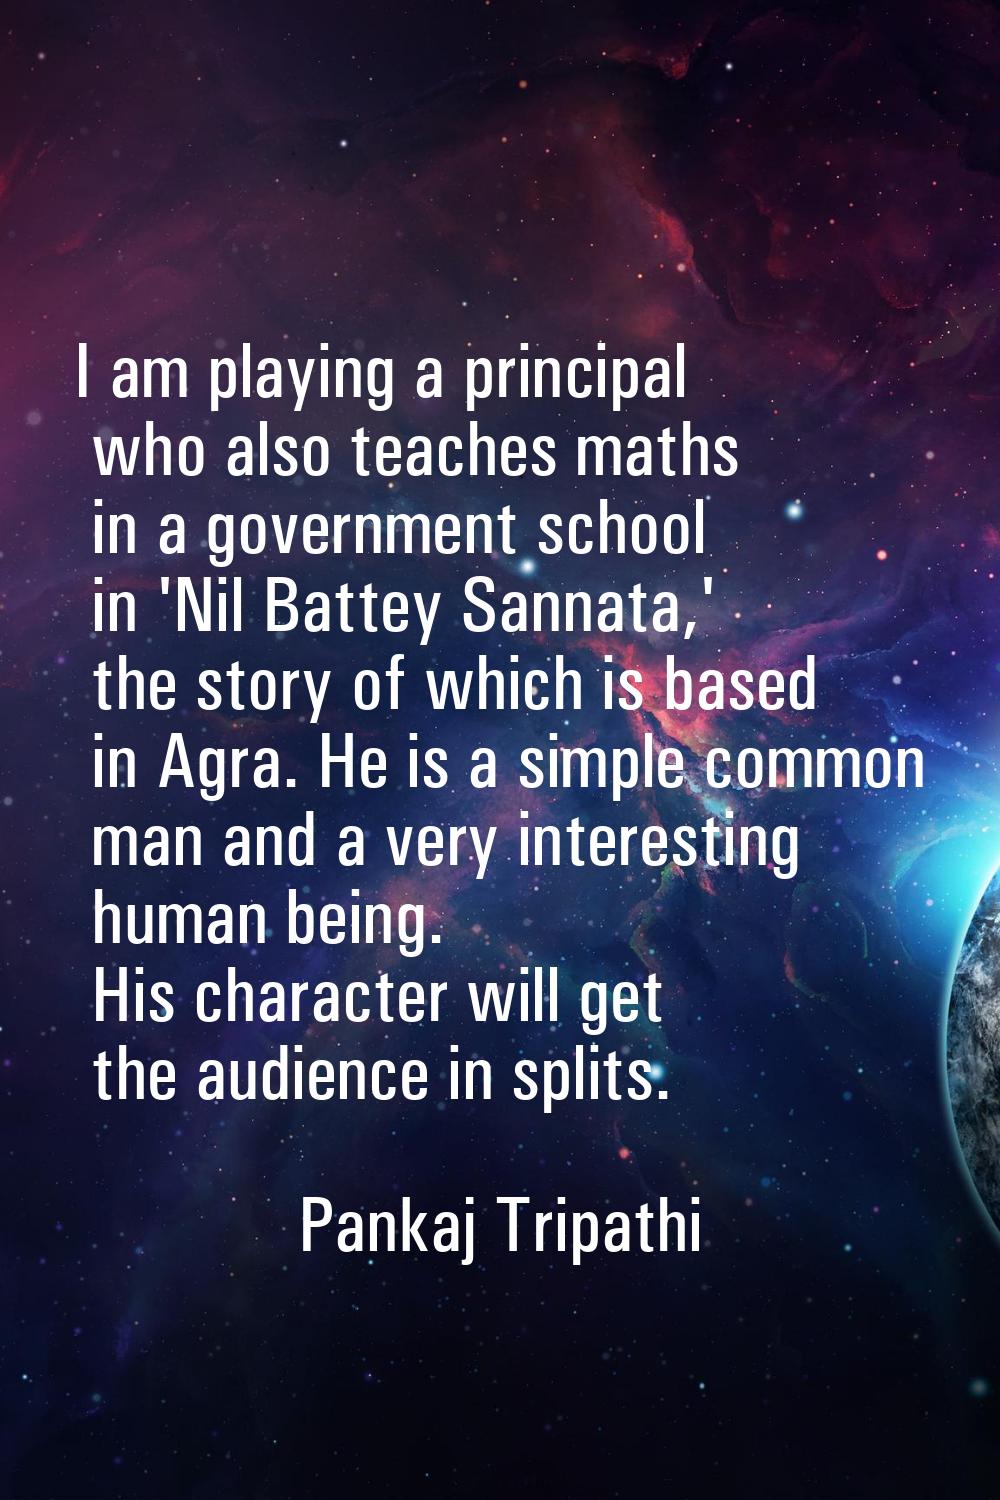 I am playing a principal who also teaches maths in a government school in 'Nil Battey Sannata,' the